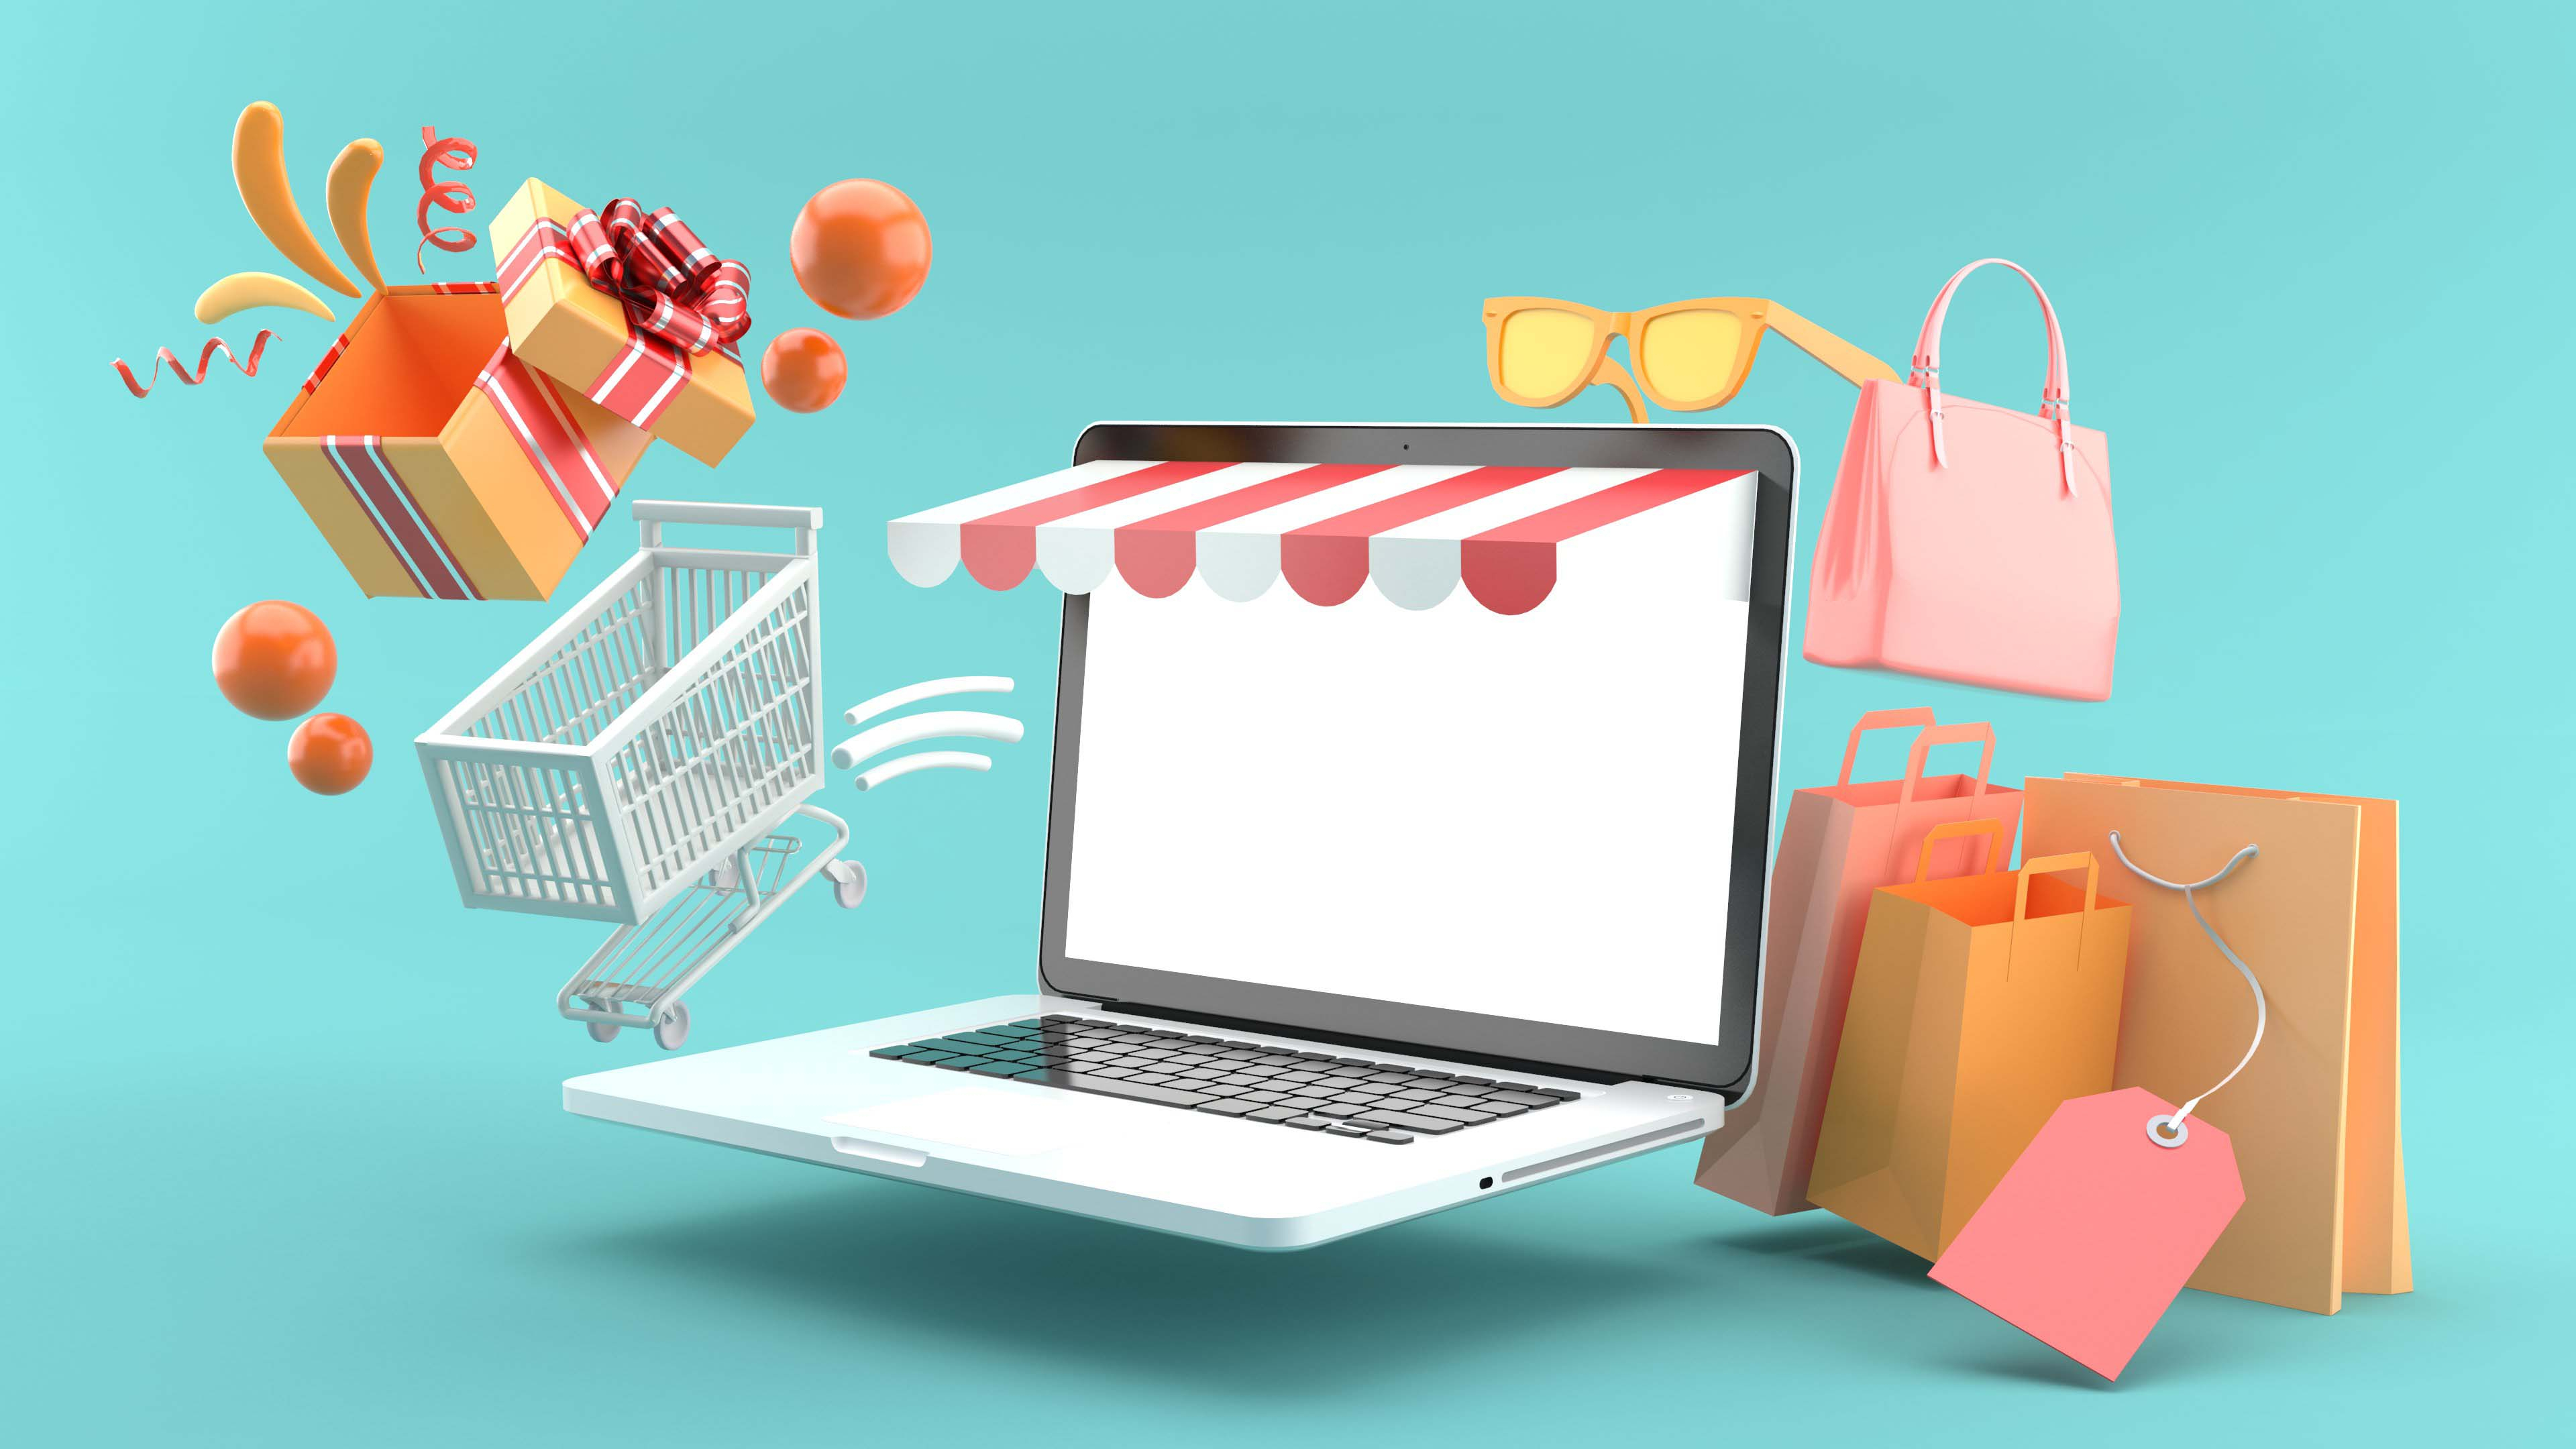 2022 Trend Products: 10 Products That Are Expected To Be Trending In E-Commerce